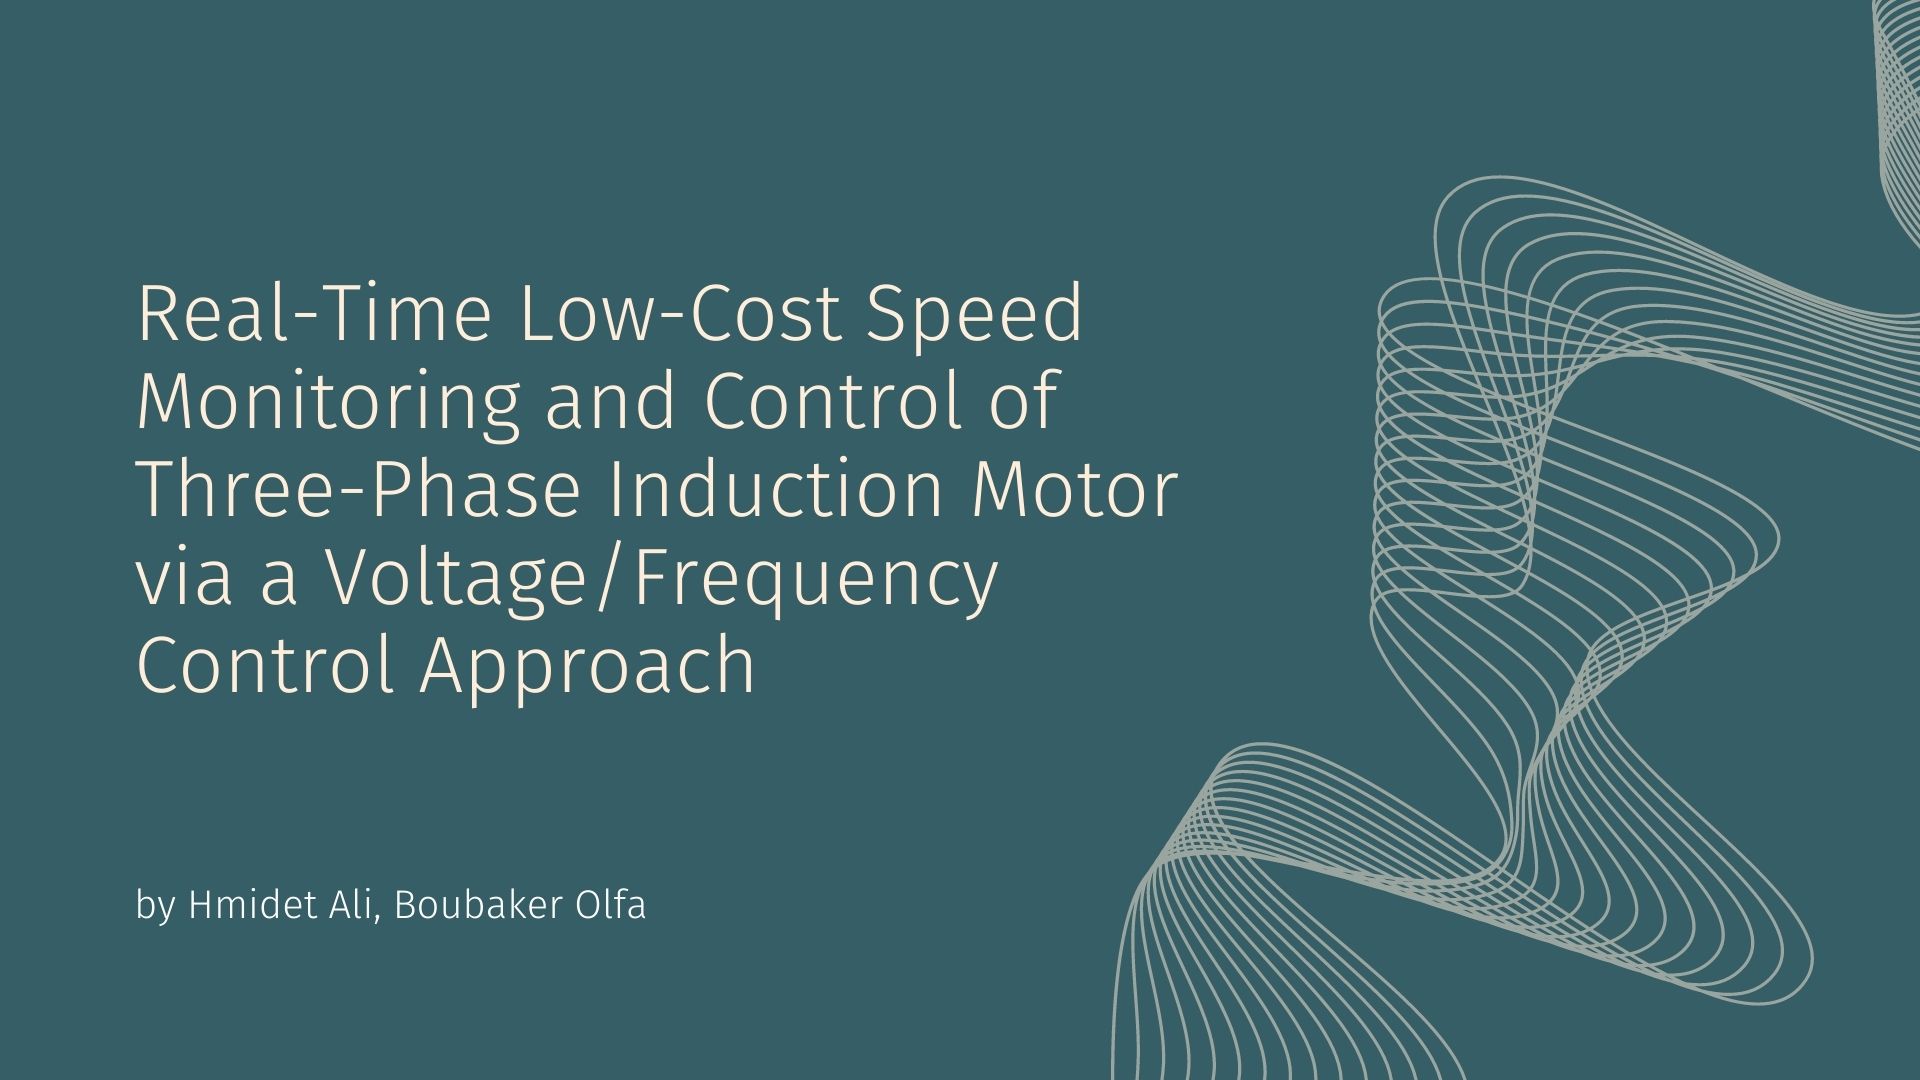 Real-Time Low-Cost Speed Monitoring and Control of Three-Phase Induction Motor via a Voltage/Frequency Control Approach